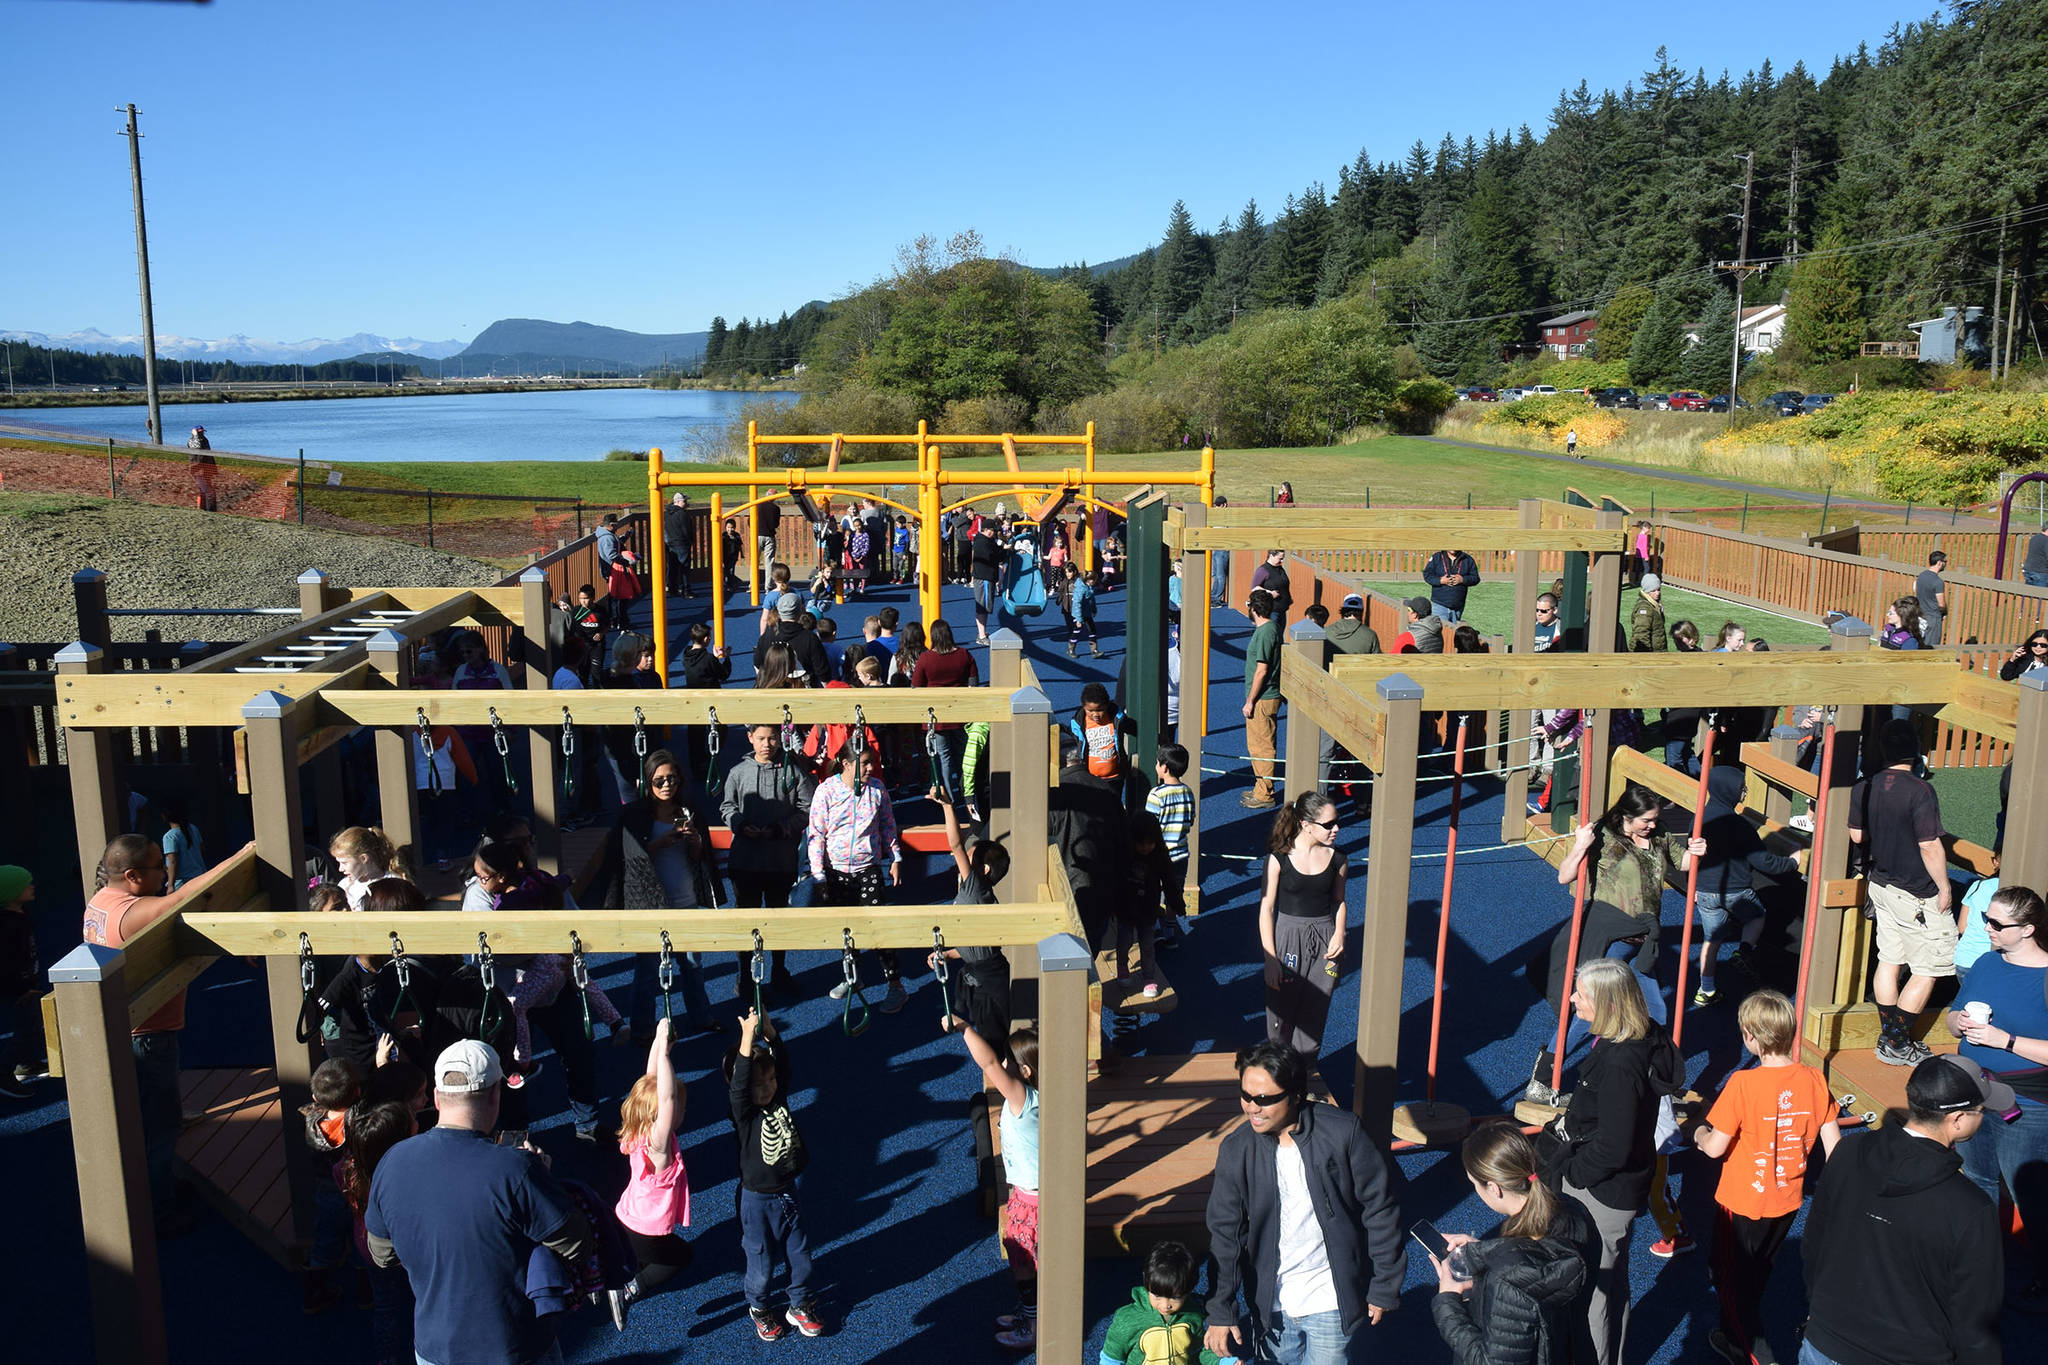 The new Project Playground design is based on the old playground, but includes a few upgrades. (Kevin Gullufsen | Juneau Empire)